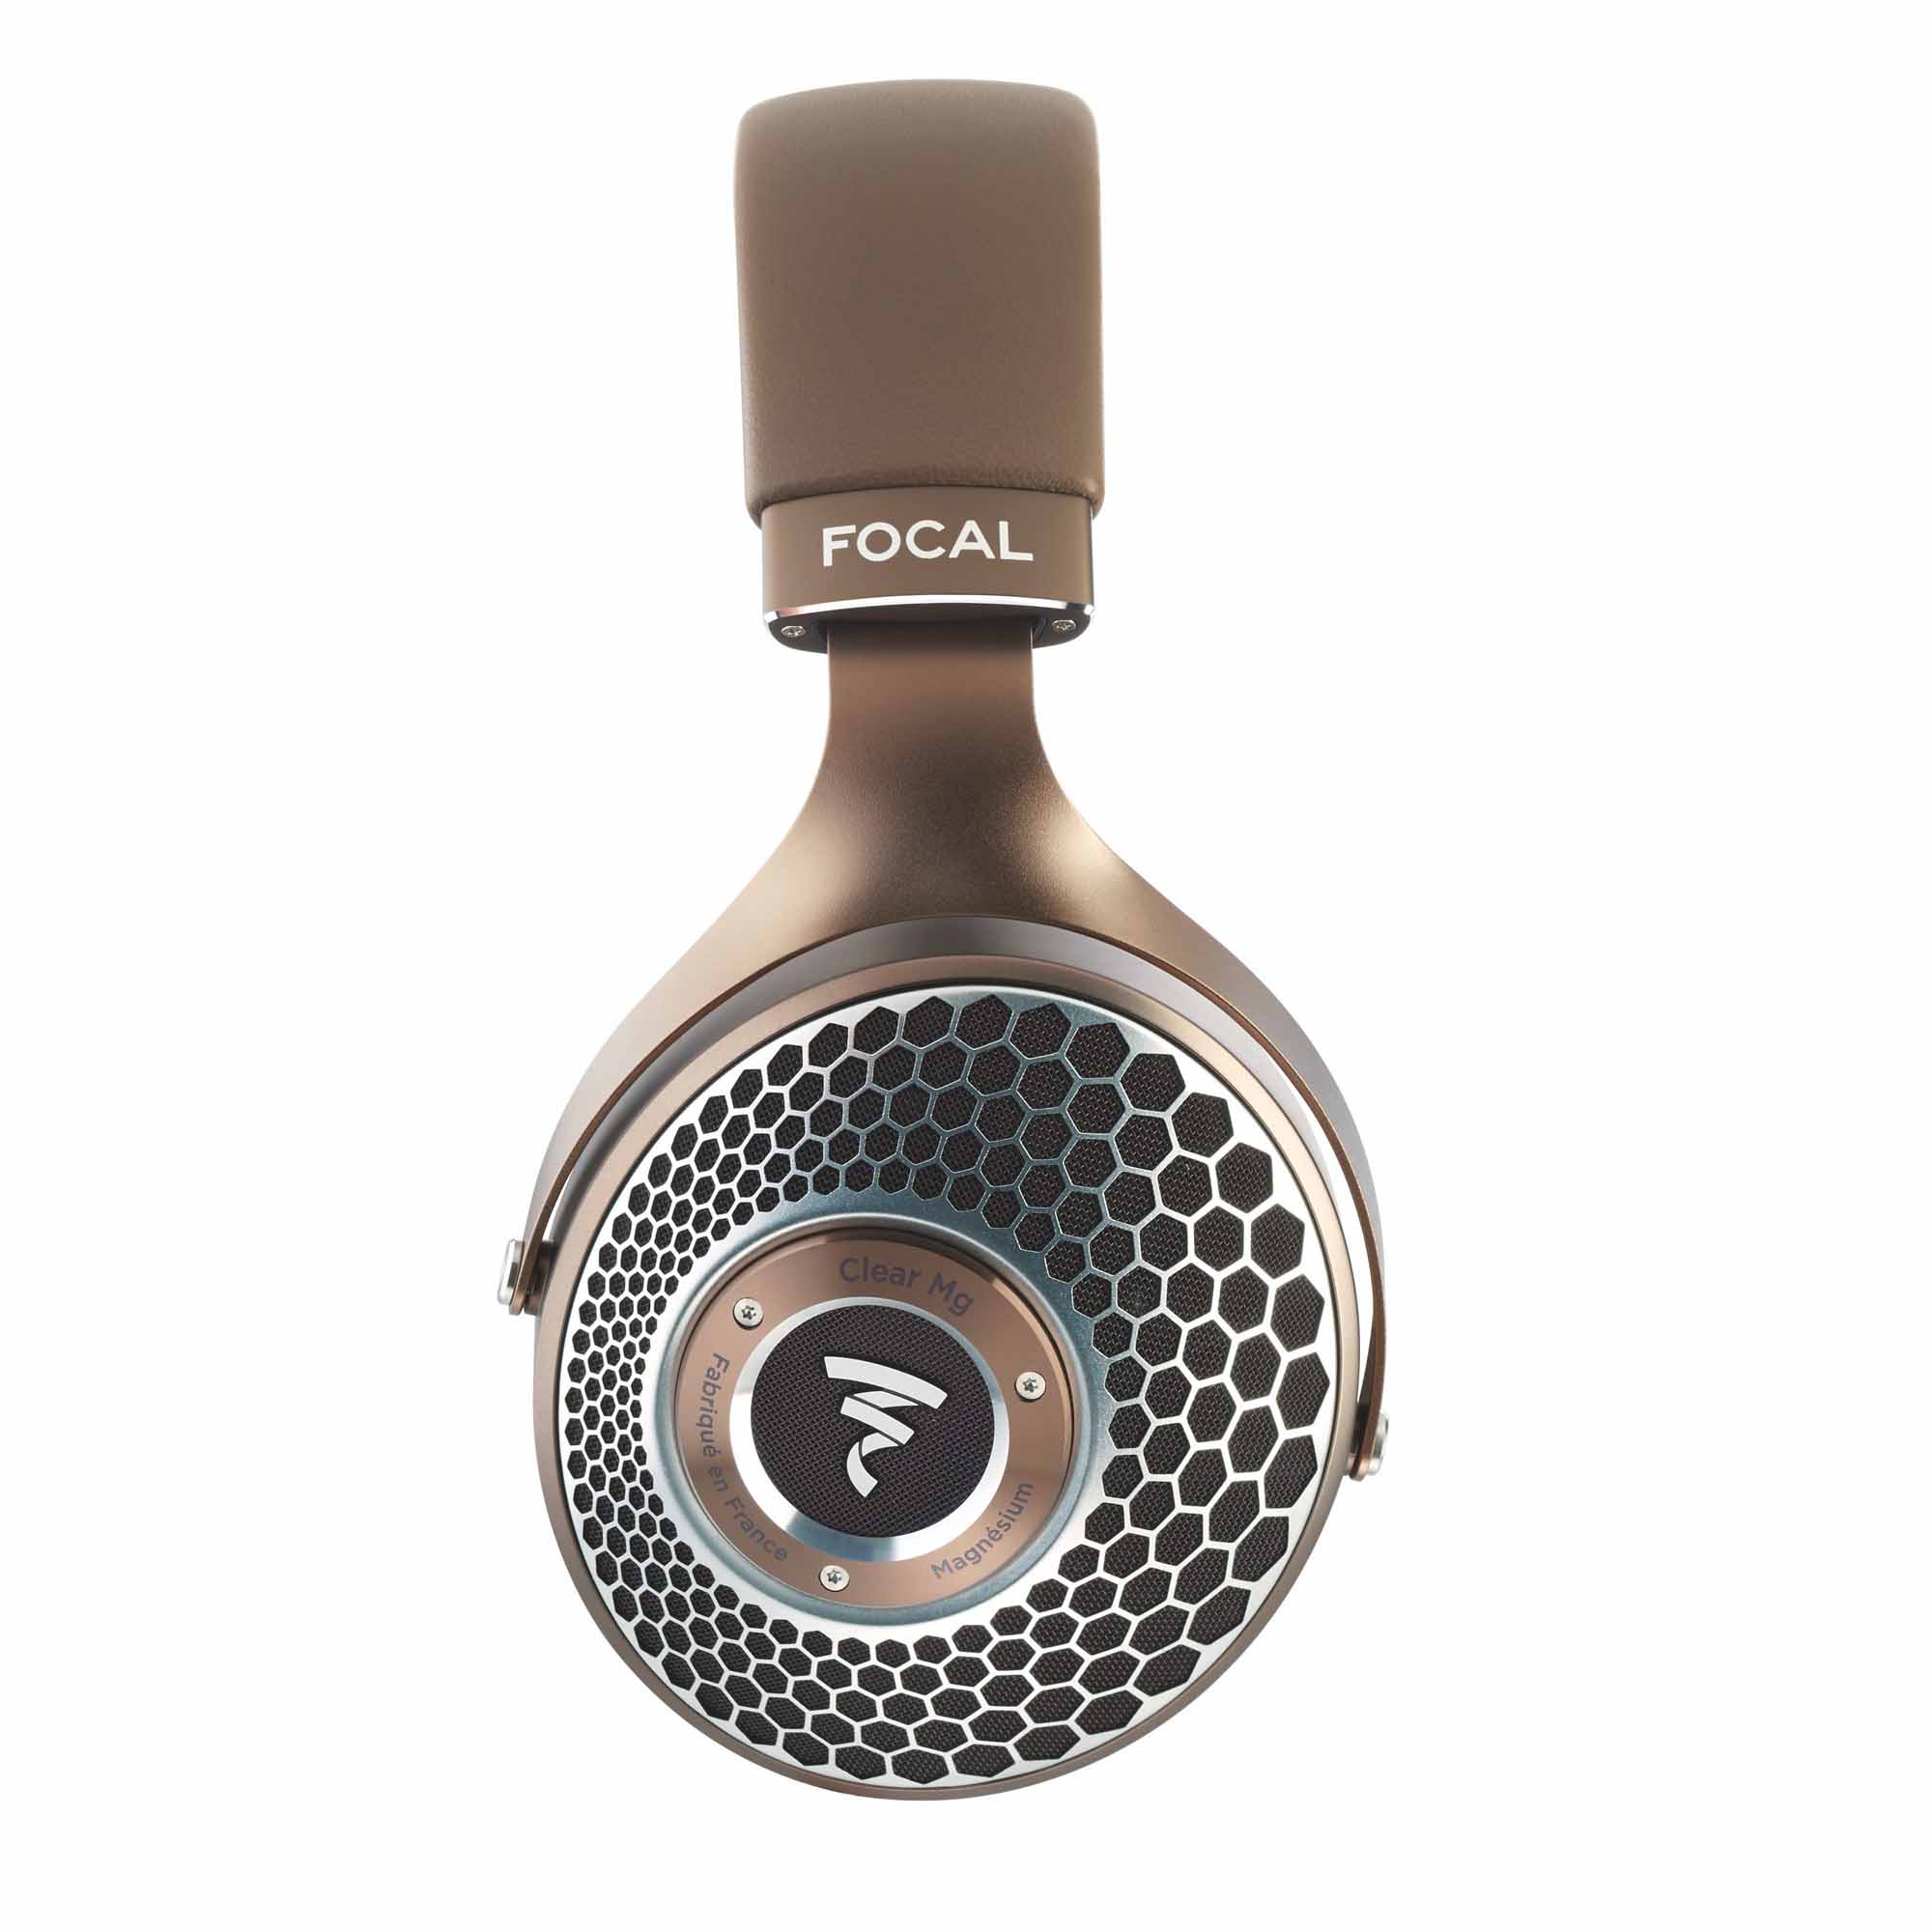 Clear mg. Focal JMLAB Headphones Clear MG. Focal Clear MG. Наушники Focal Clear. Focal Utopia by Tournaire.